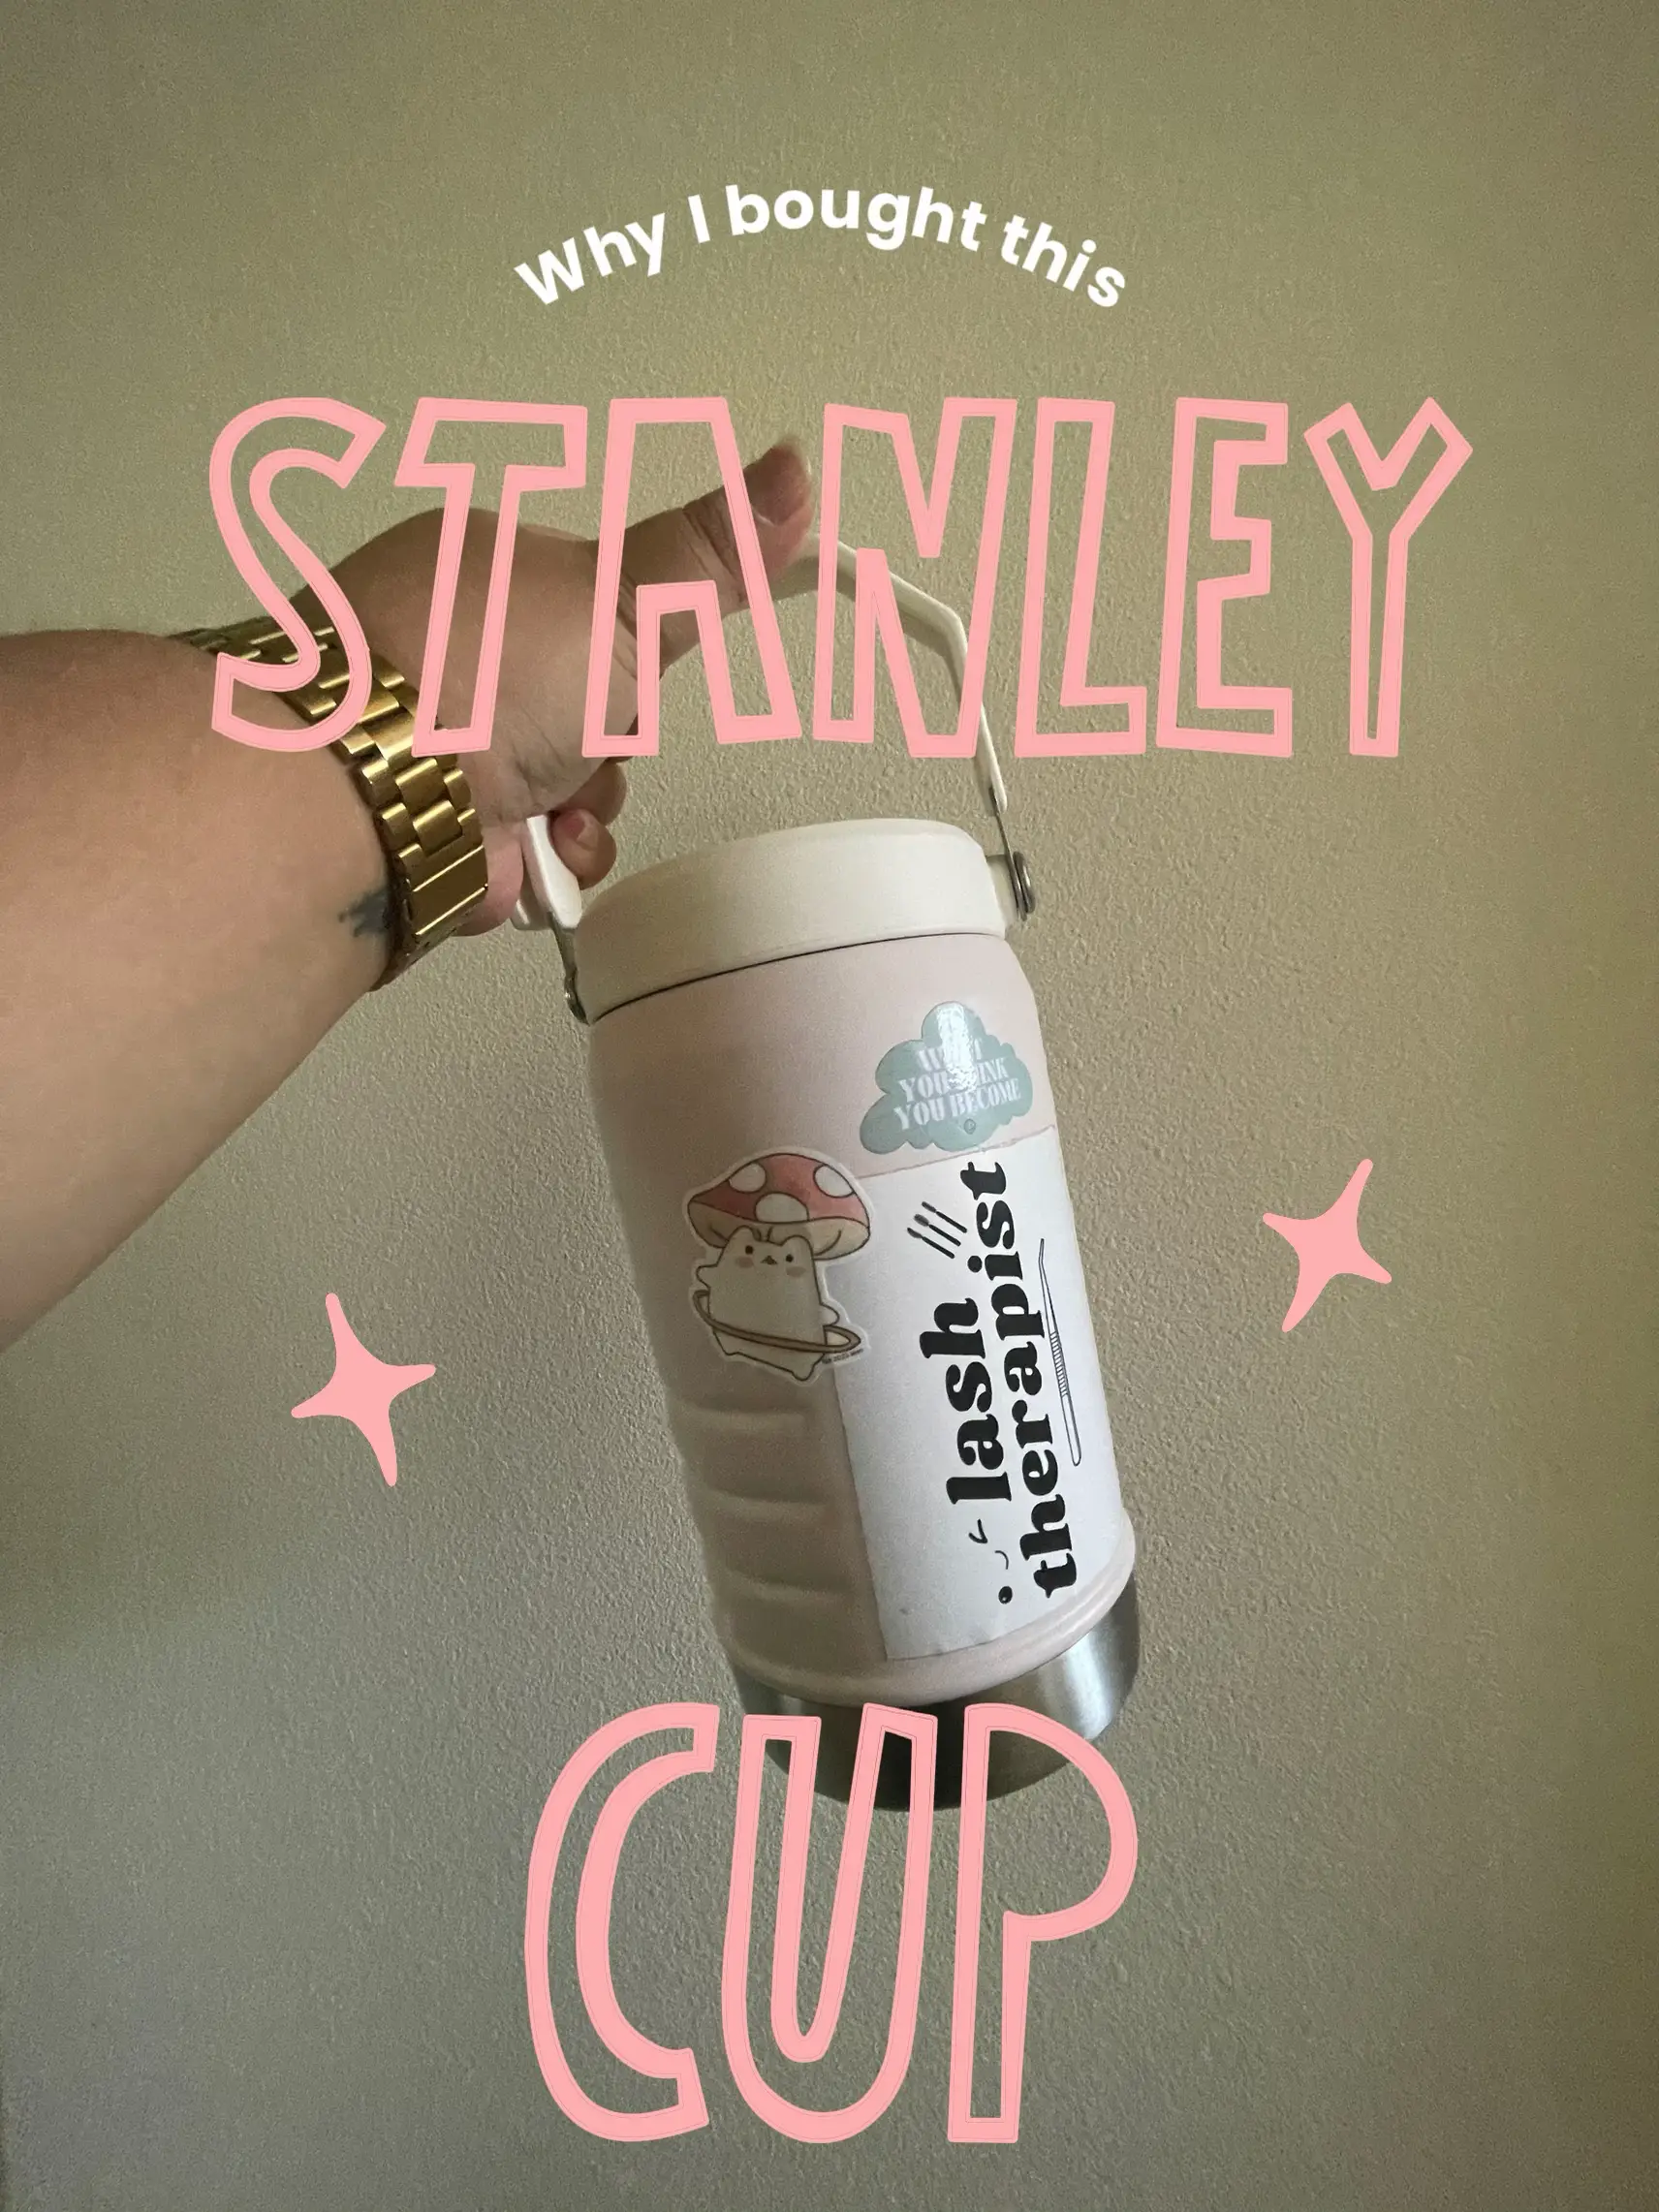 Got this mini stanley cup from @target for $30. I love it and the